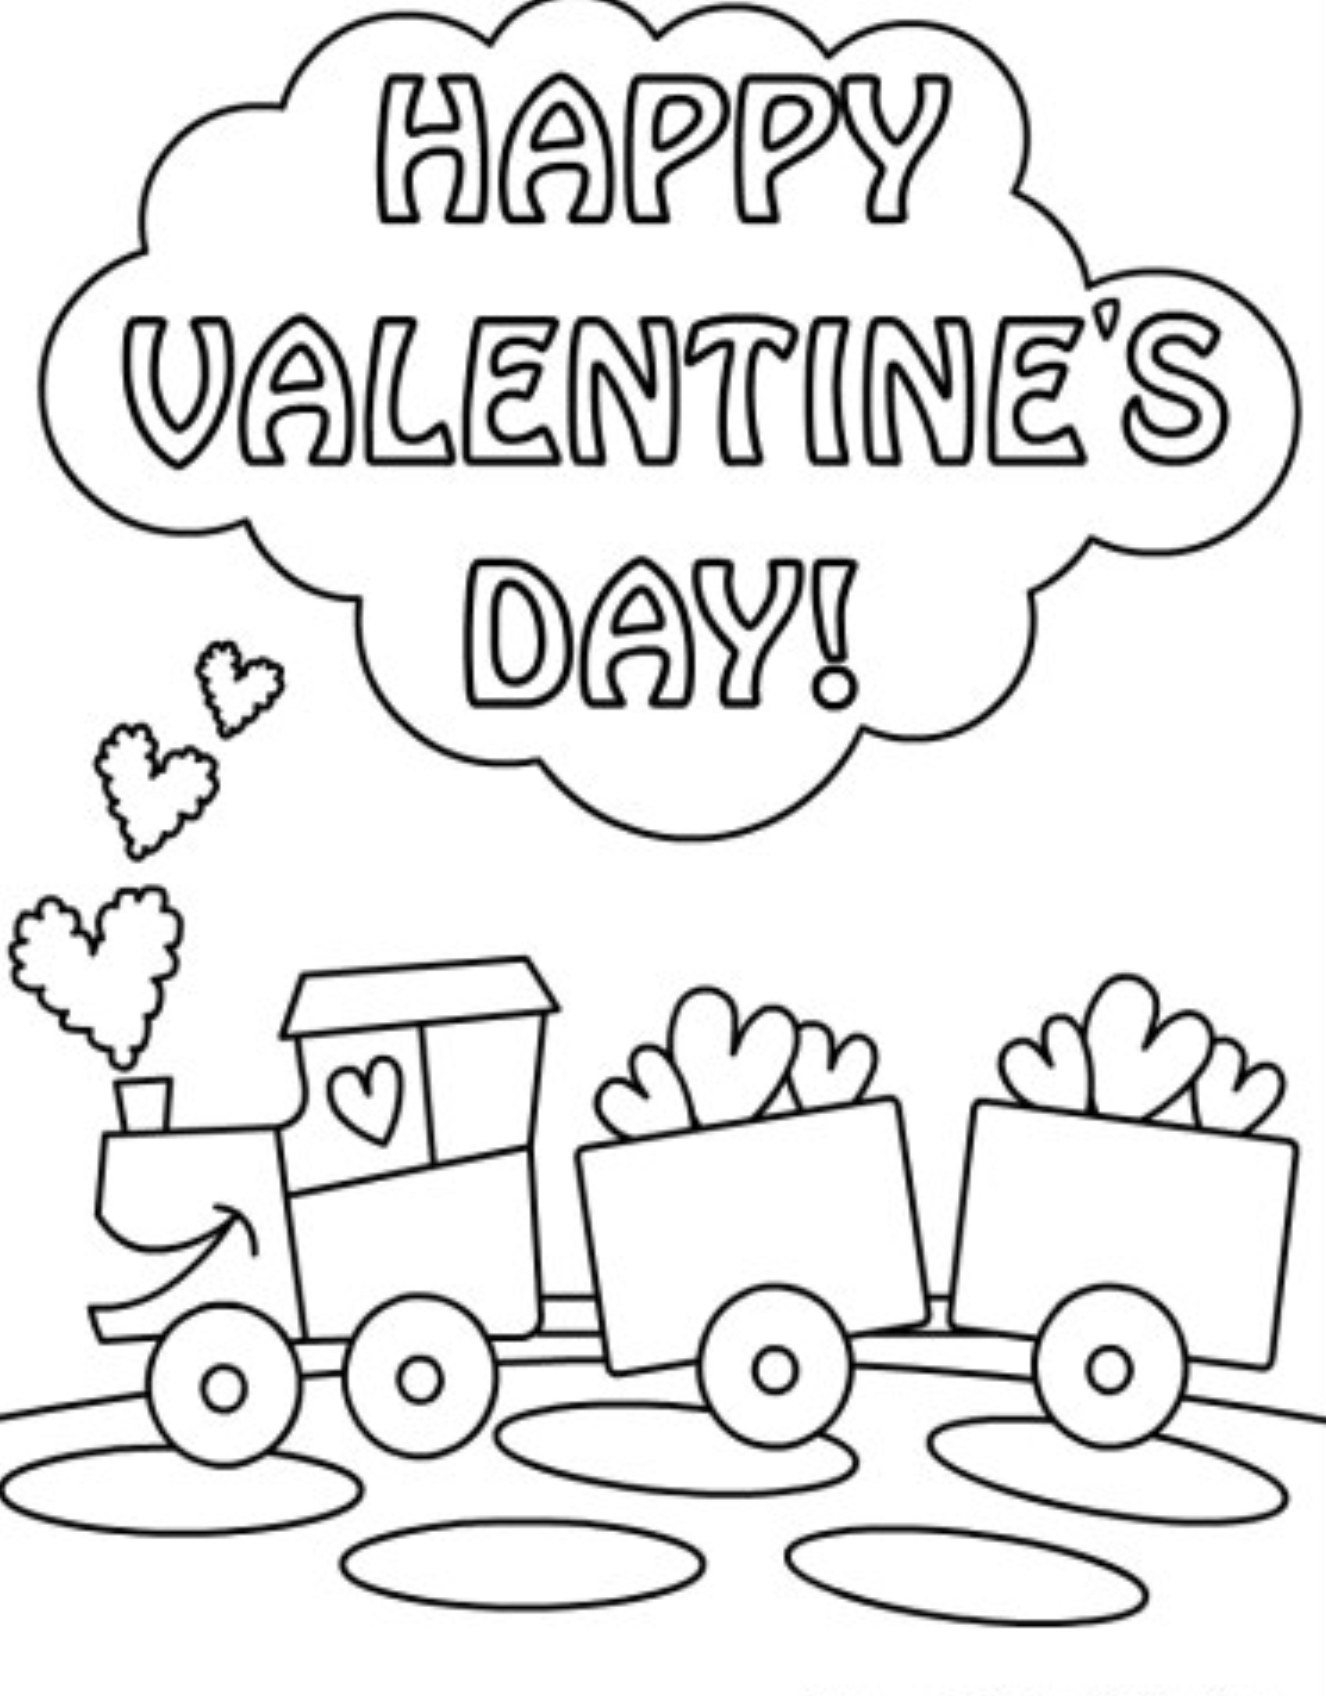 Valentines Day Coloring Page Coloring Ideas Coloring Pages Of Valentines Day Staggering At